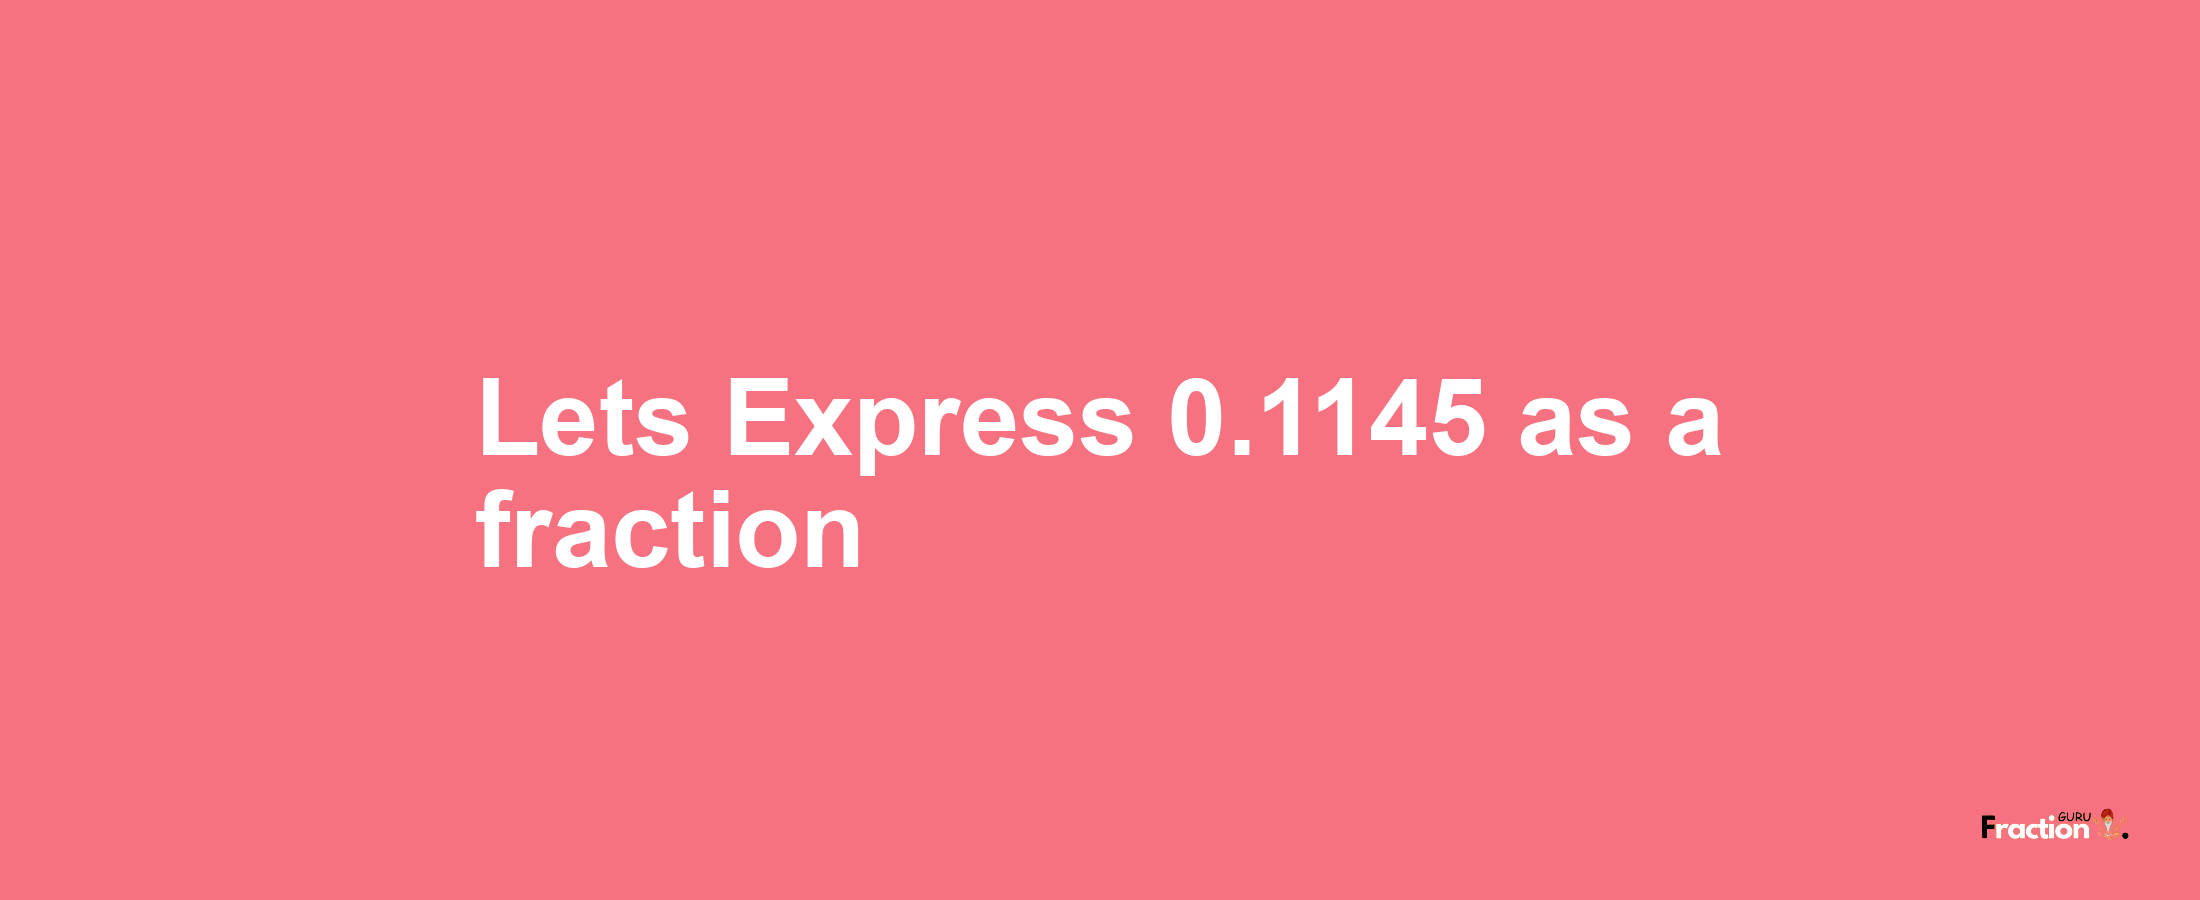 Lets Express 0.1145 as afraction